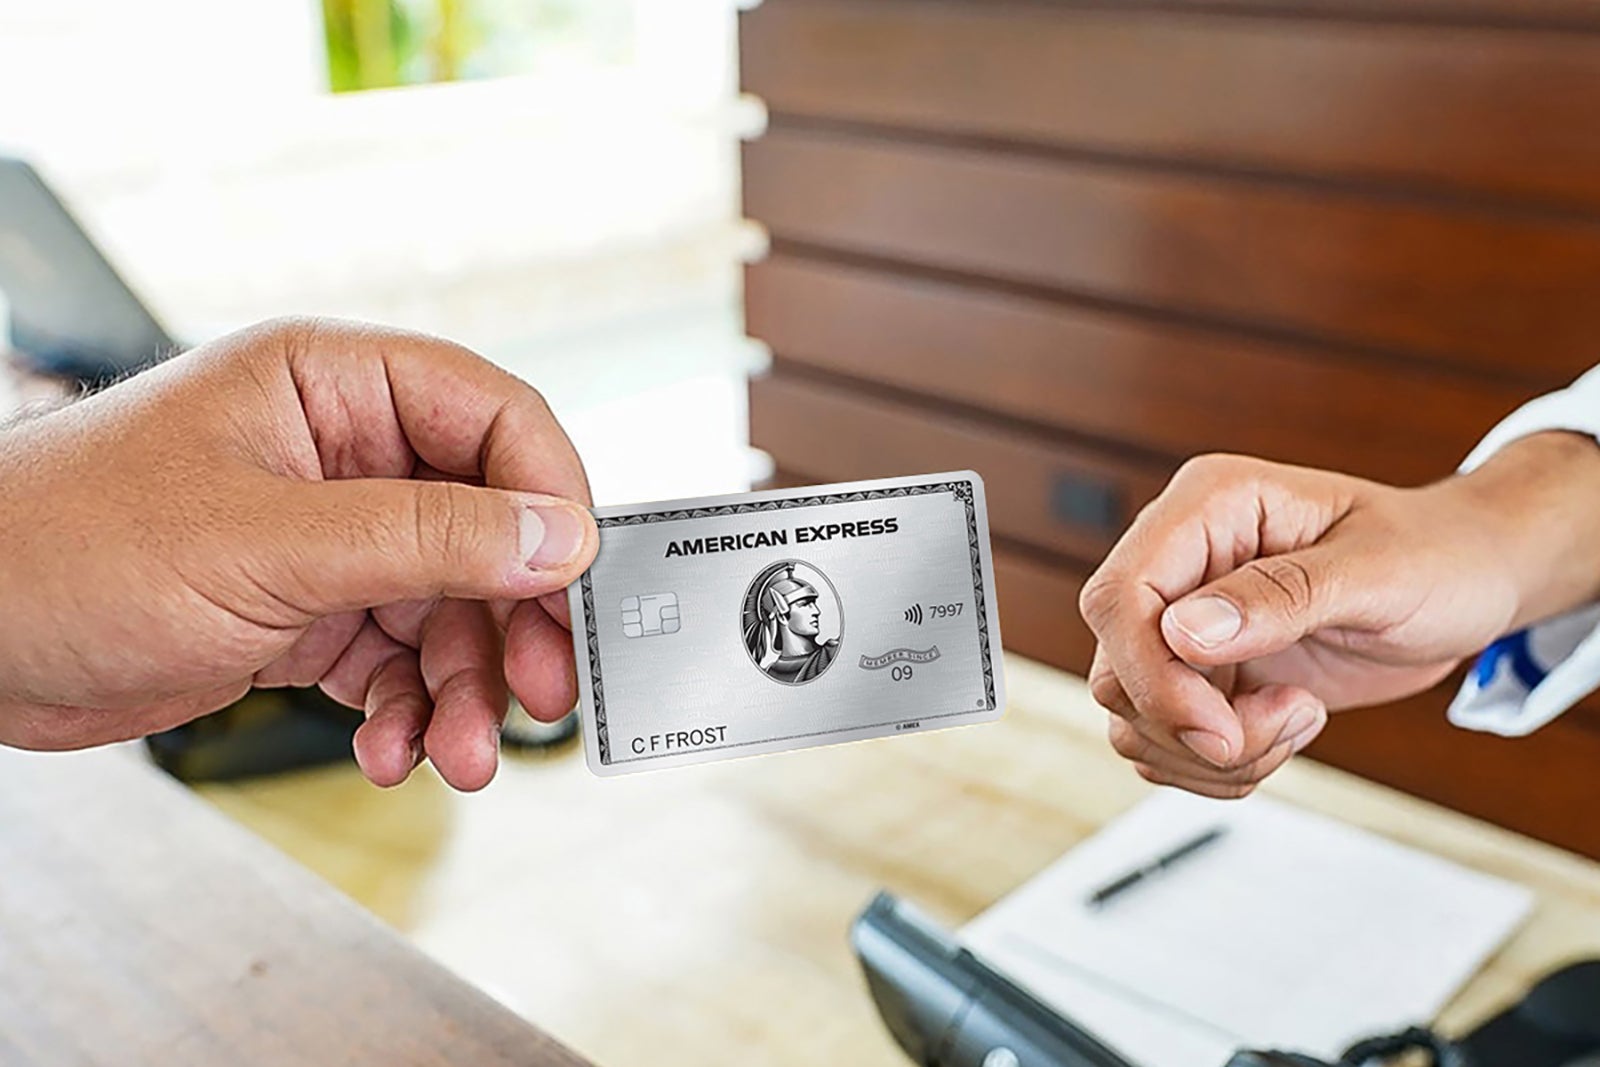 an unseen person hands the Amex Platinum Card to a cashier